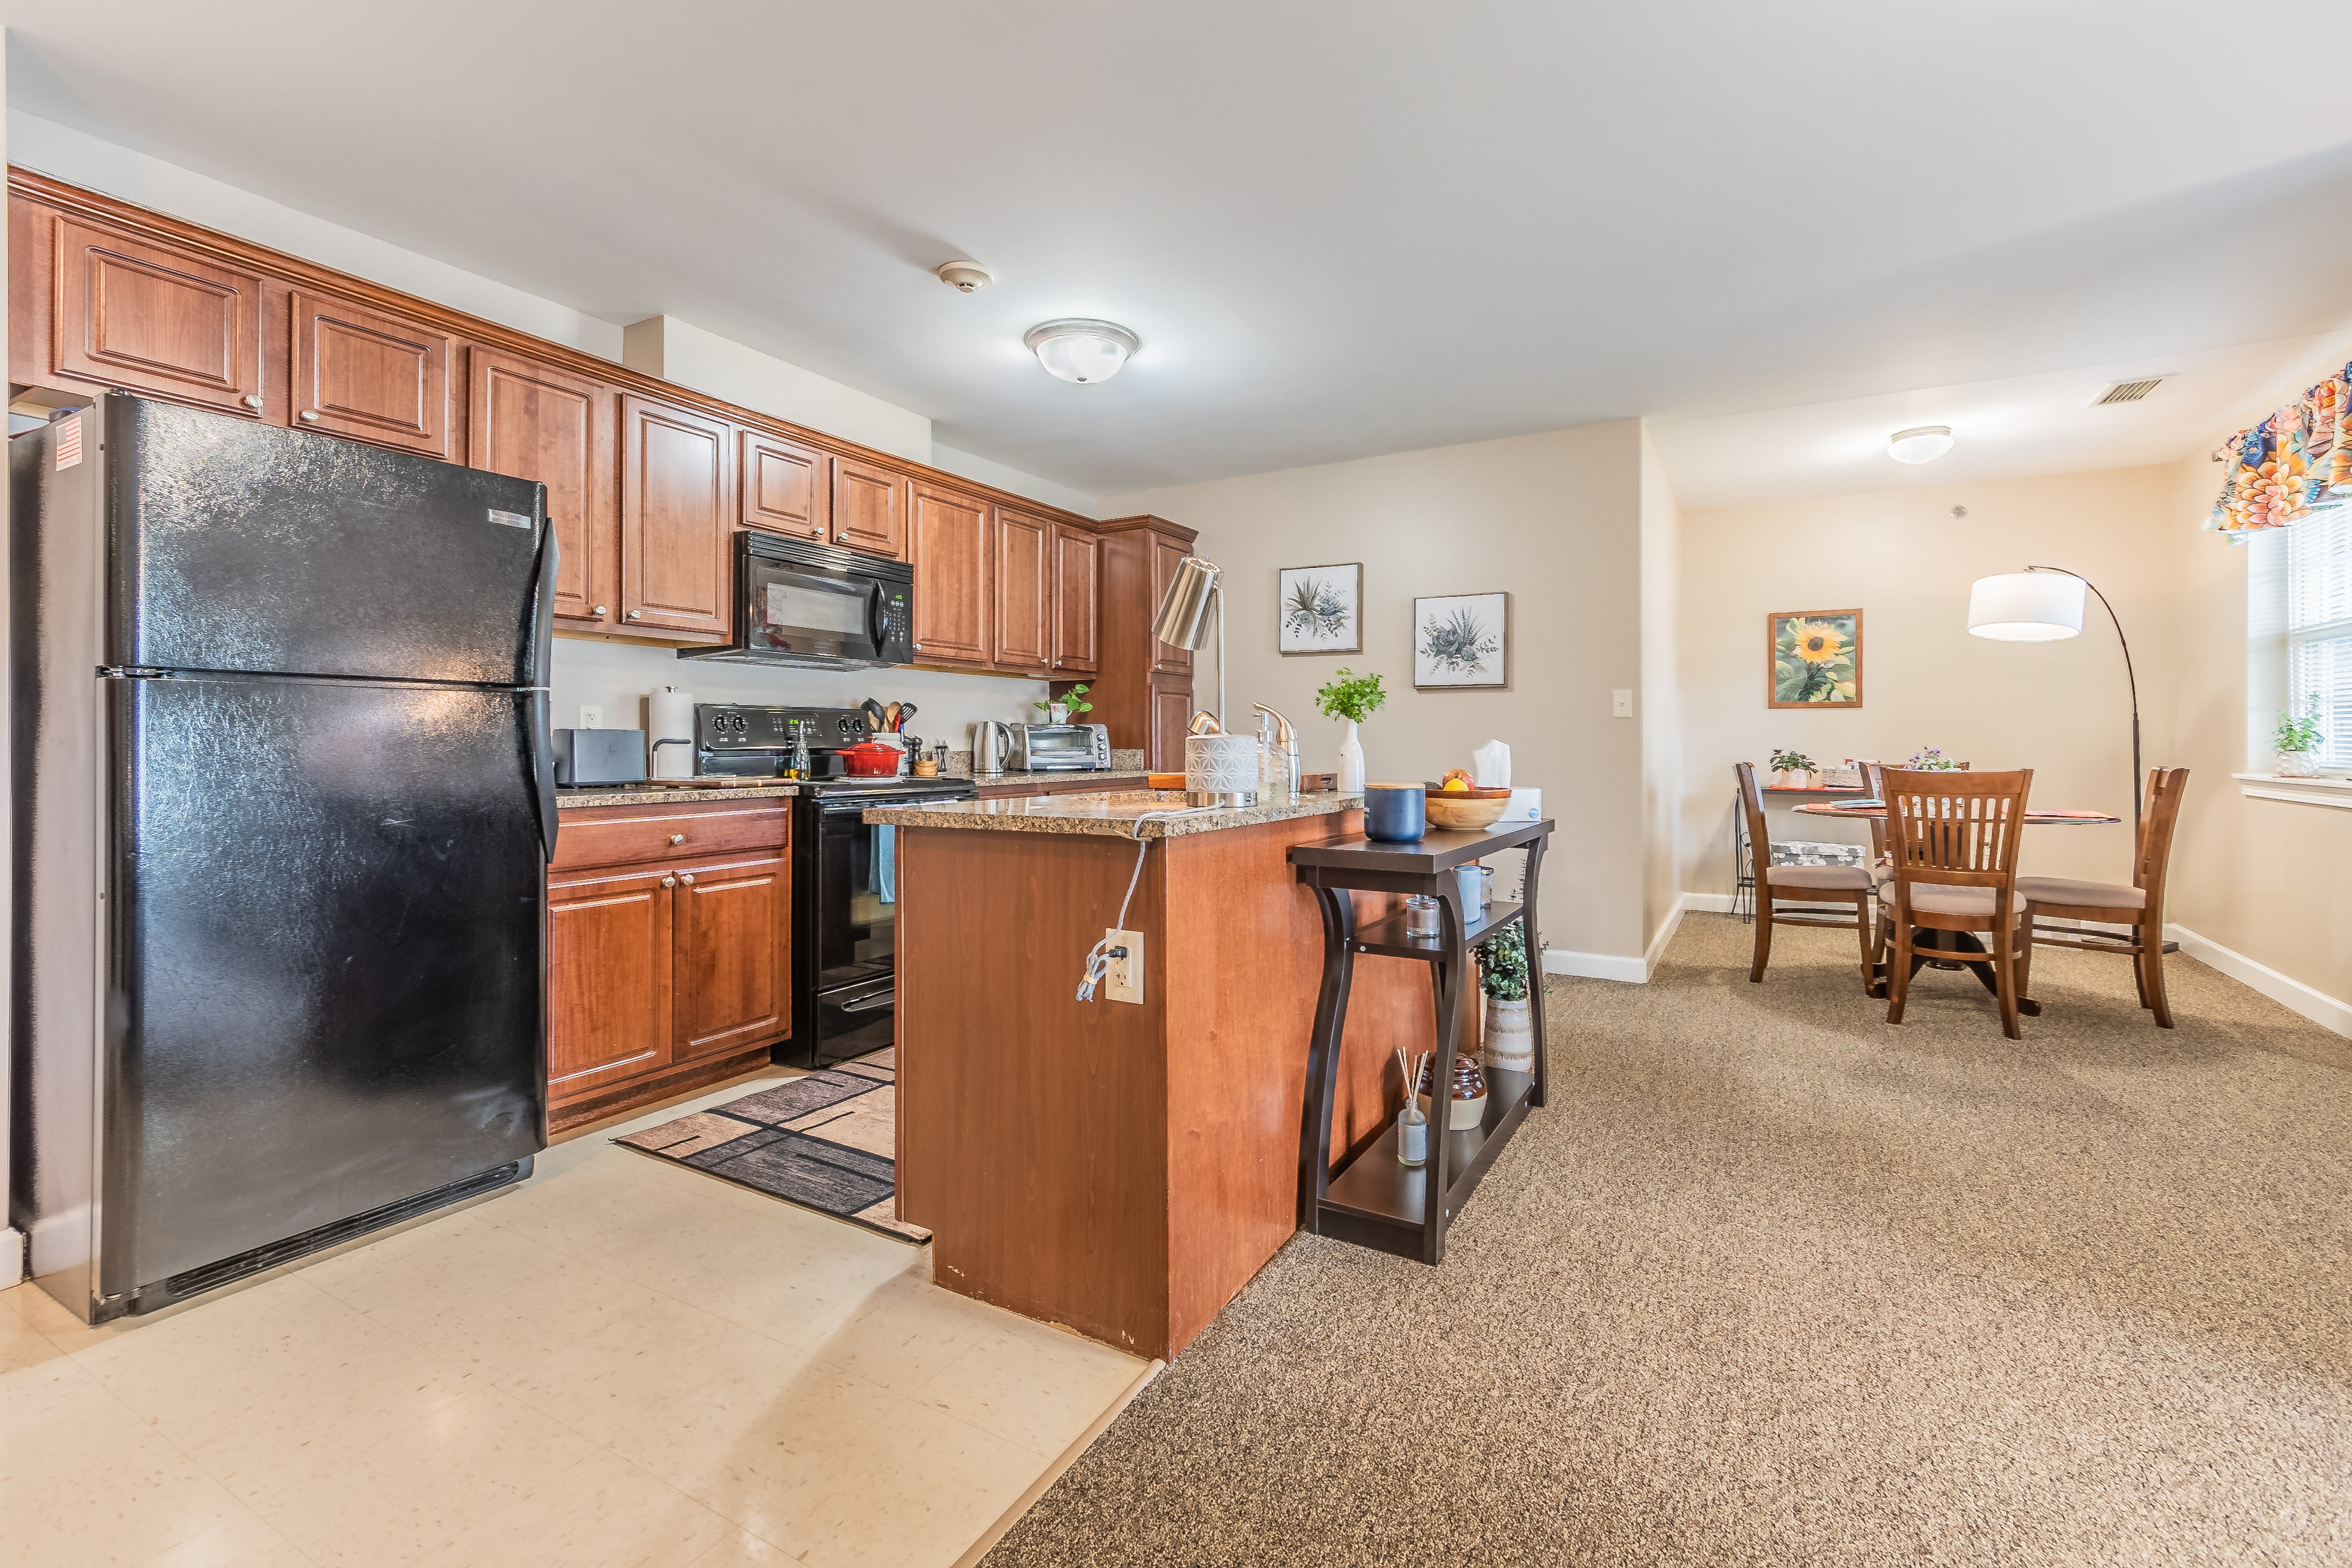 Spacious kitchen at Schuyler Commons in Utica, New York.